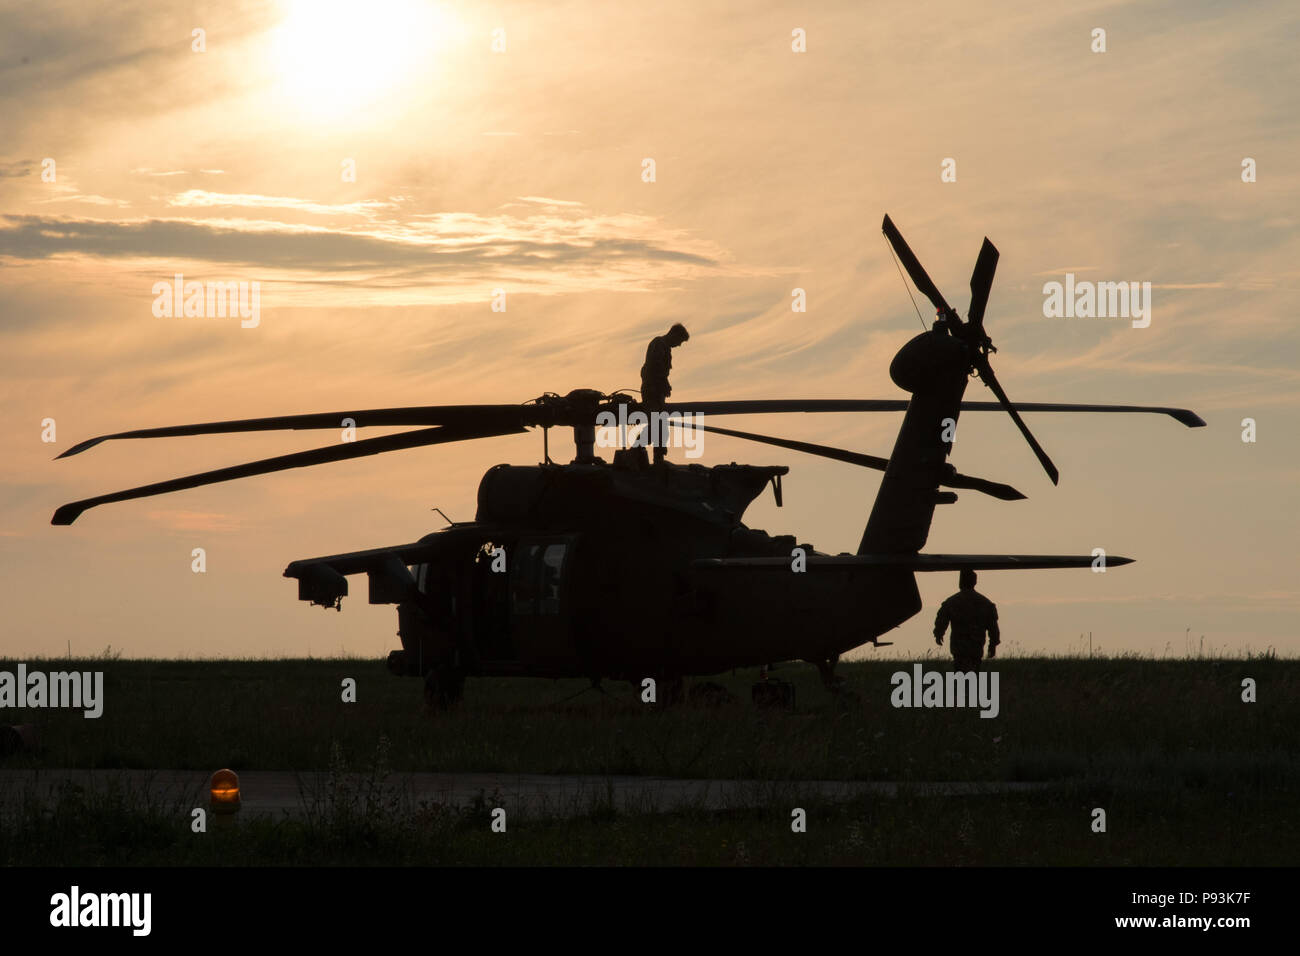 U.S. Soldiers assigned to the 2nd General Support Aviation Battalion, 4th Aviation Regiment, 4th Combat Aviation Brigade, 4th Infantry Division, conduct safety checks and prepare their UH-60 Blackhawk for air assault training at Mihail Koglniceanu Air Base, Romania, July 10, 2018. The Soldiers of 2nd GSAB are conducting similar training in multiple locations throughout Europe in support of Atlantic Resolve, a U.S. endeavor to fulfill NATO commitments by rotating U.S.-based units throughout the European theater to deter aggression against NATO allies and partners in Europe. (U.S. Army photo by  Stock Photo